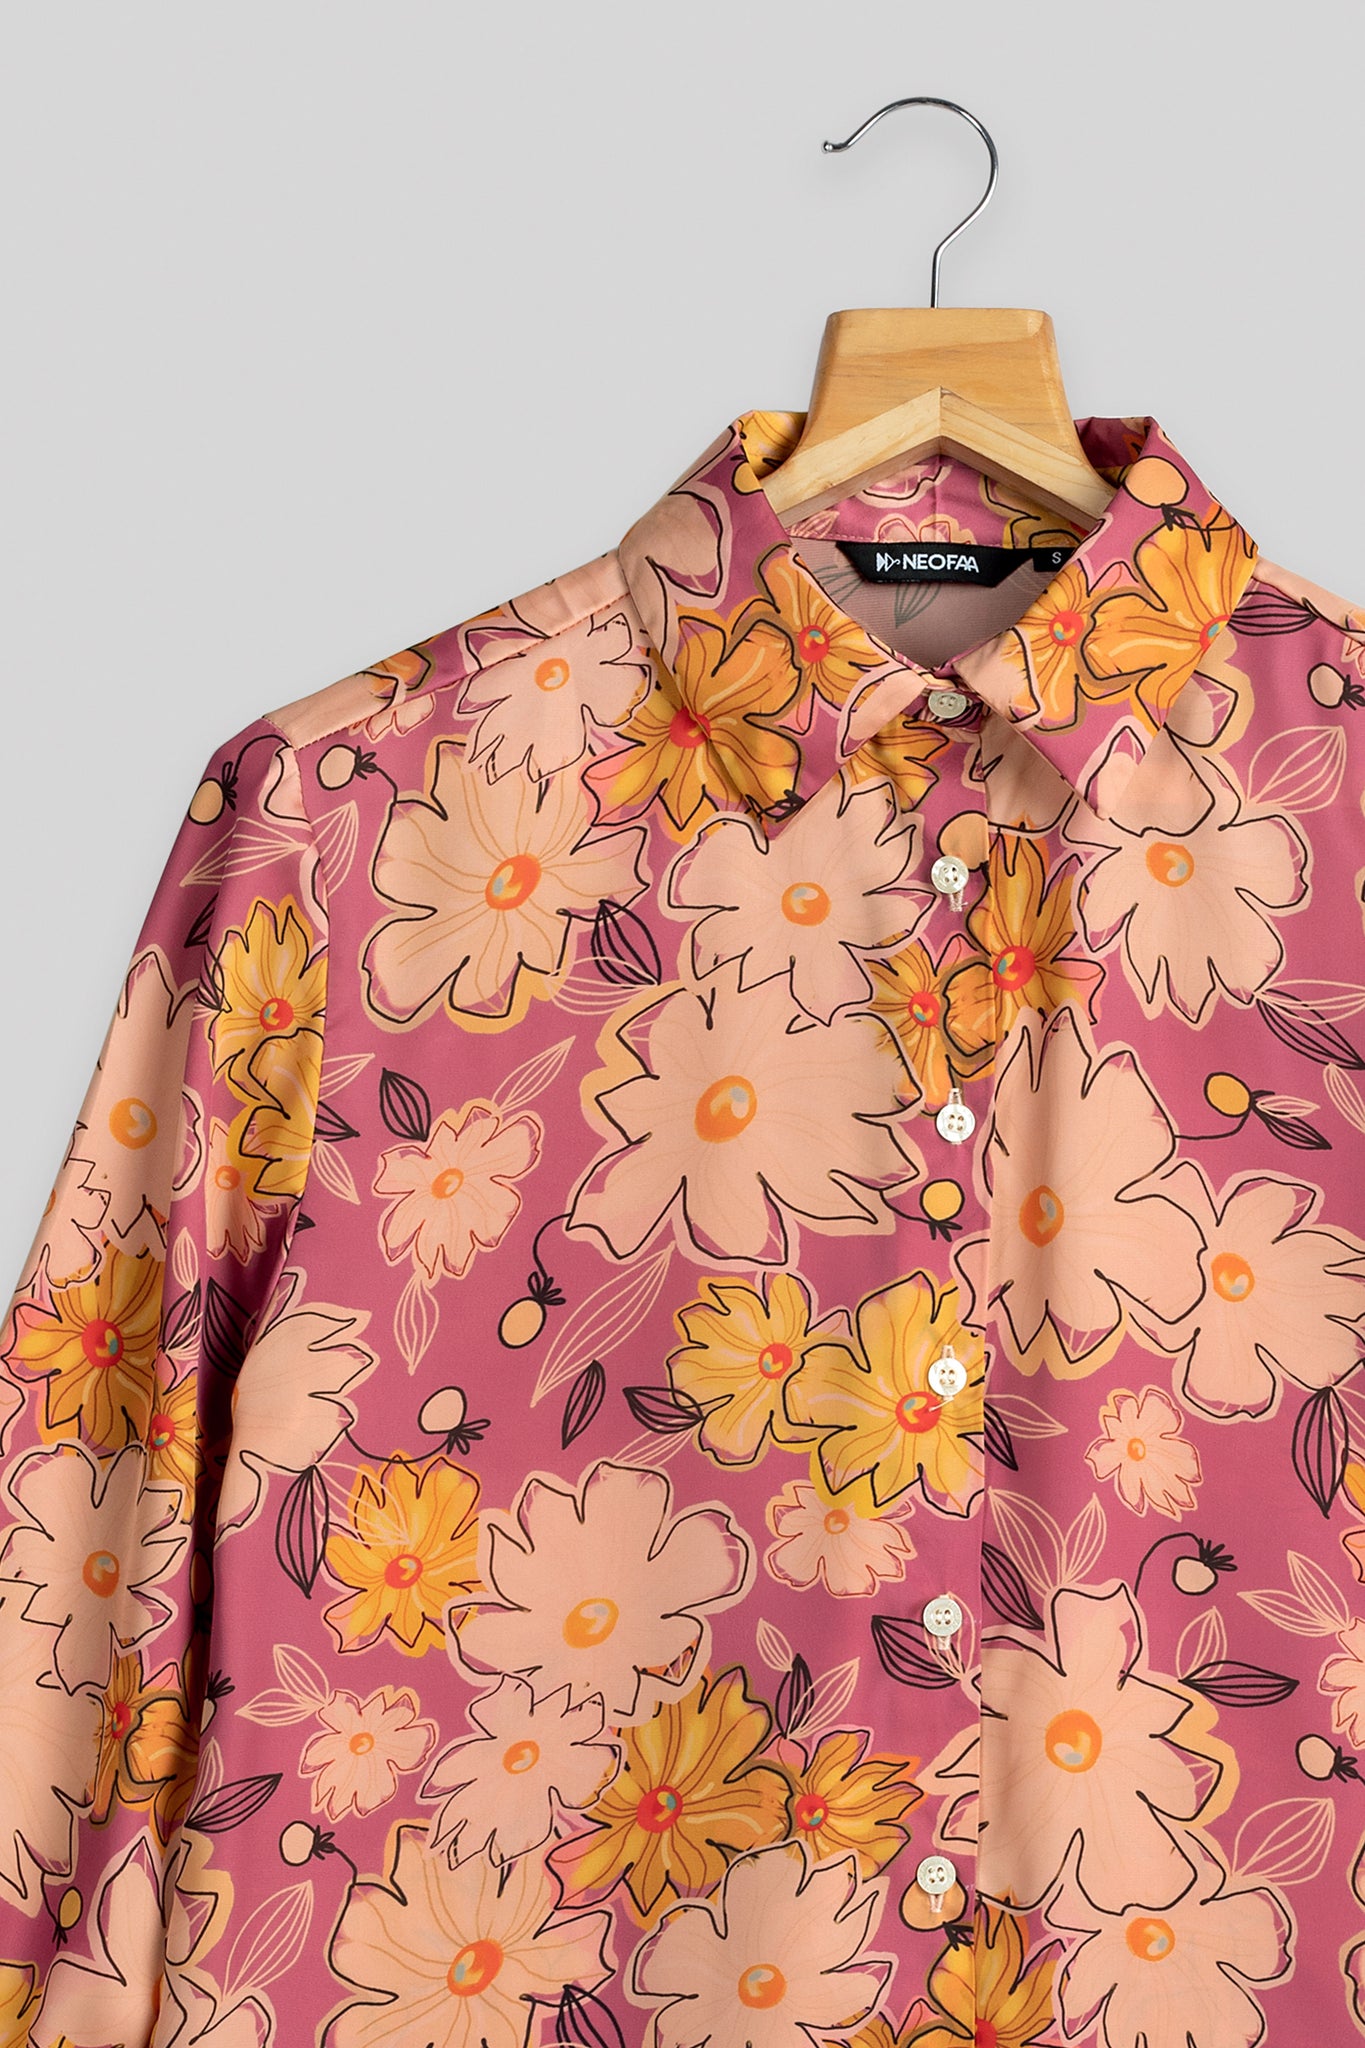 Stylish Floral Shirt For Women